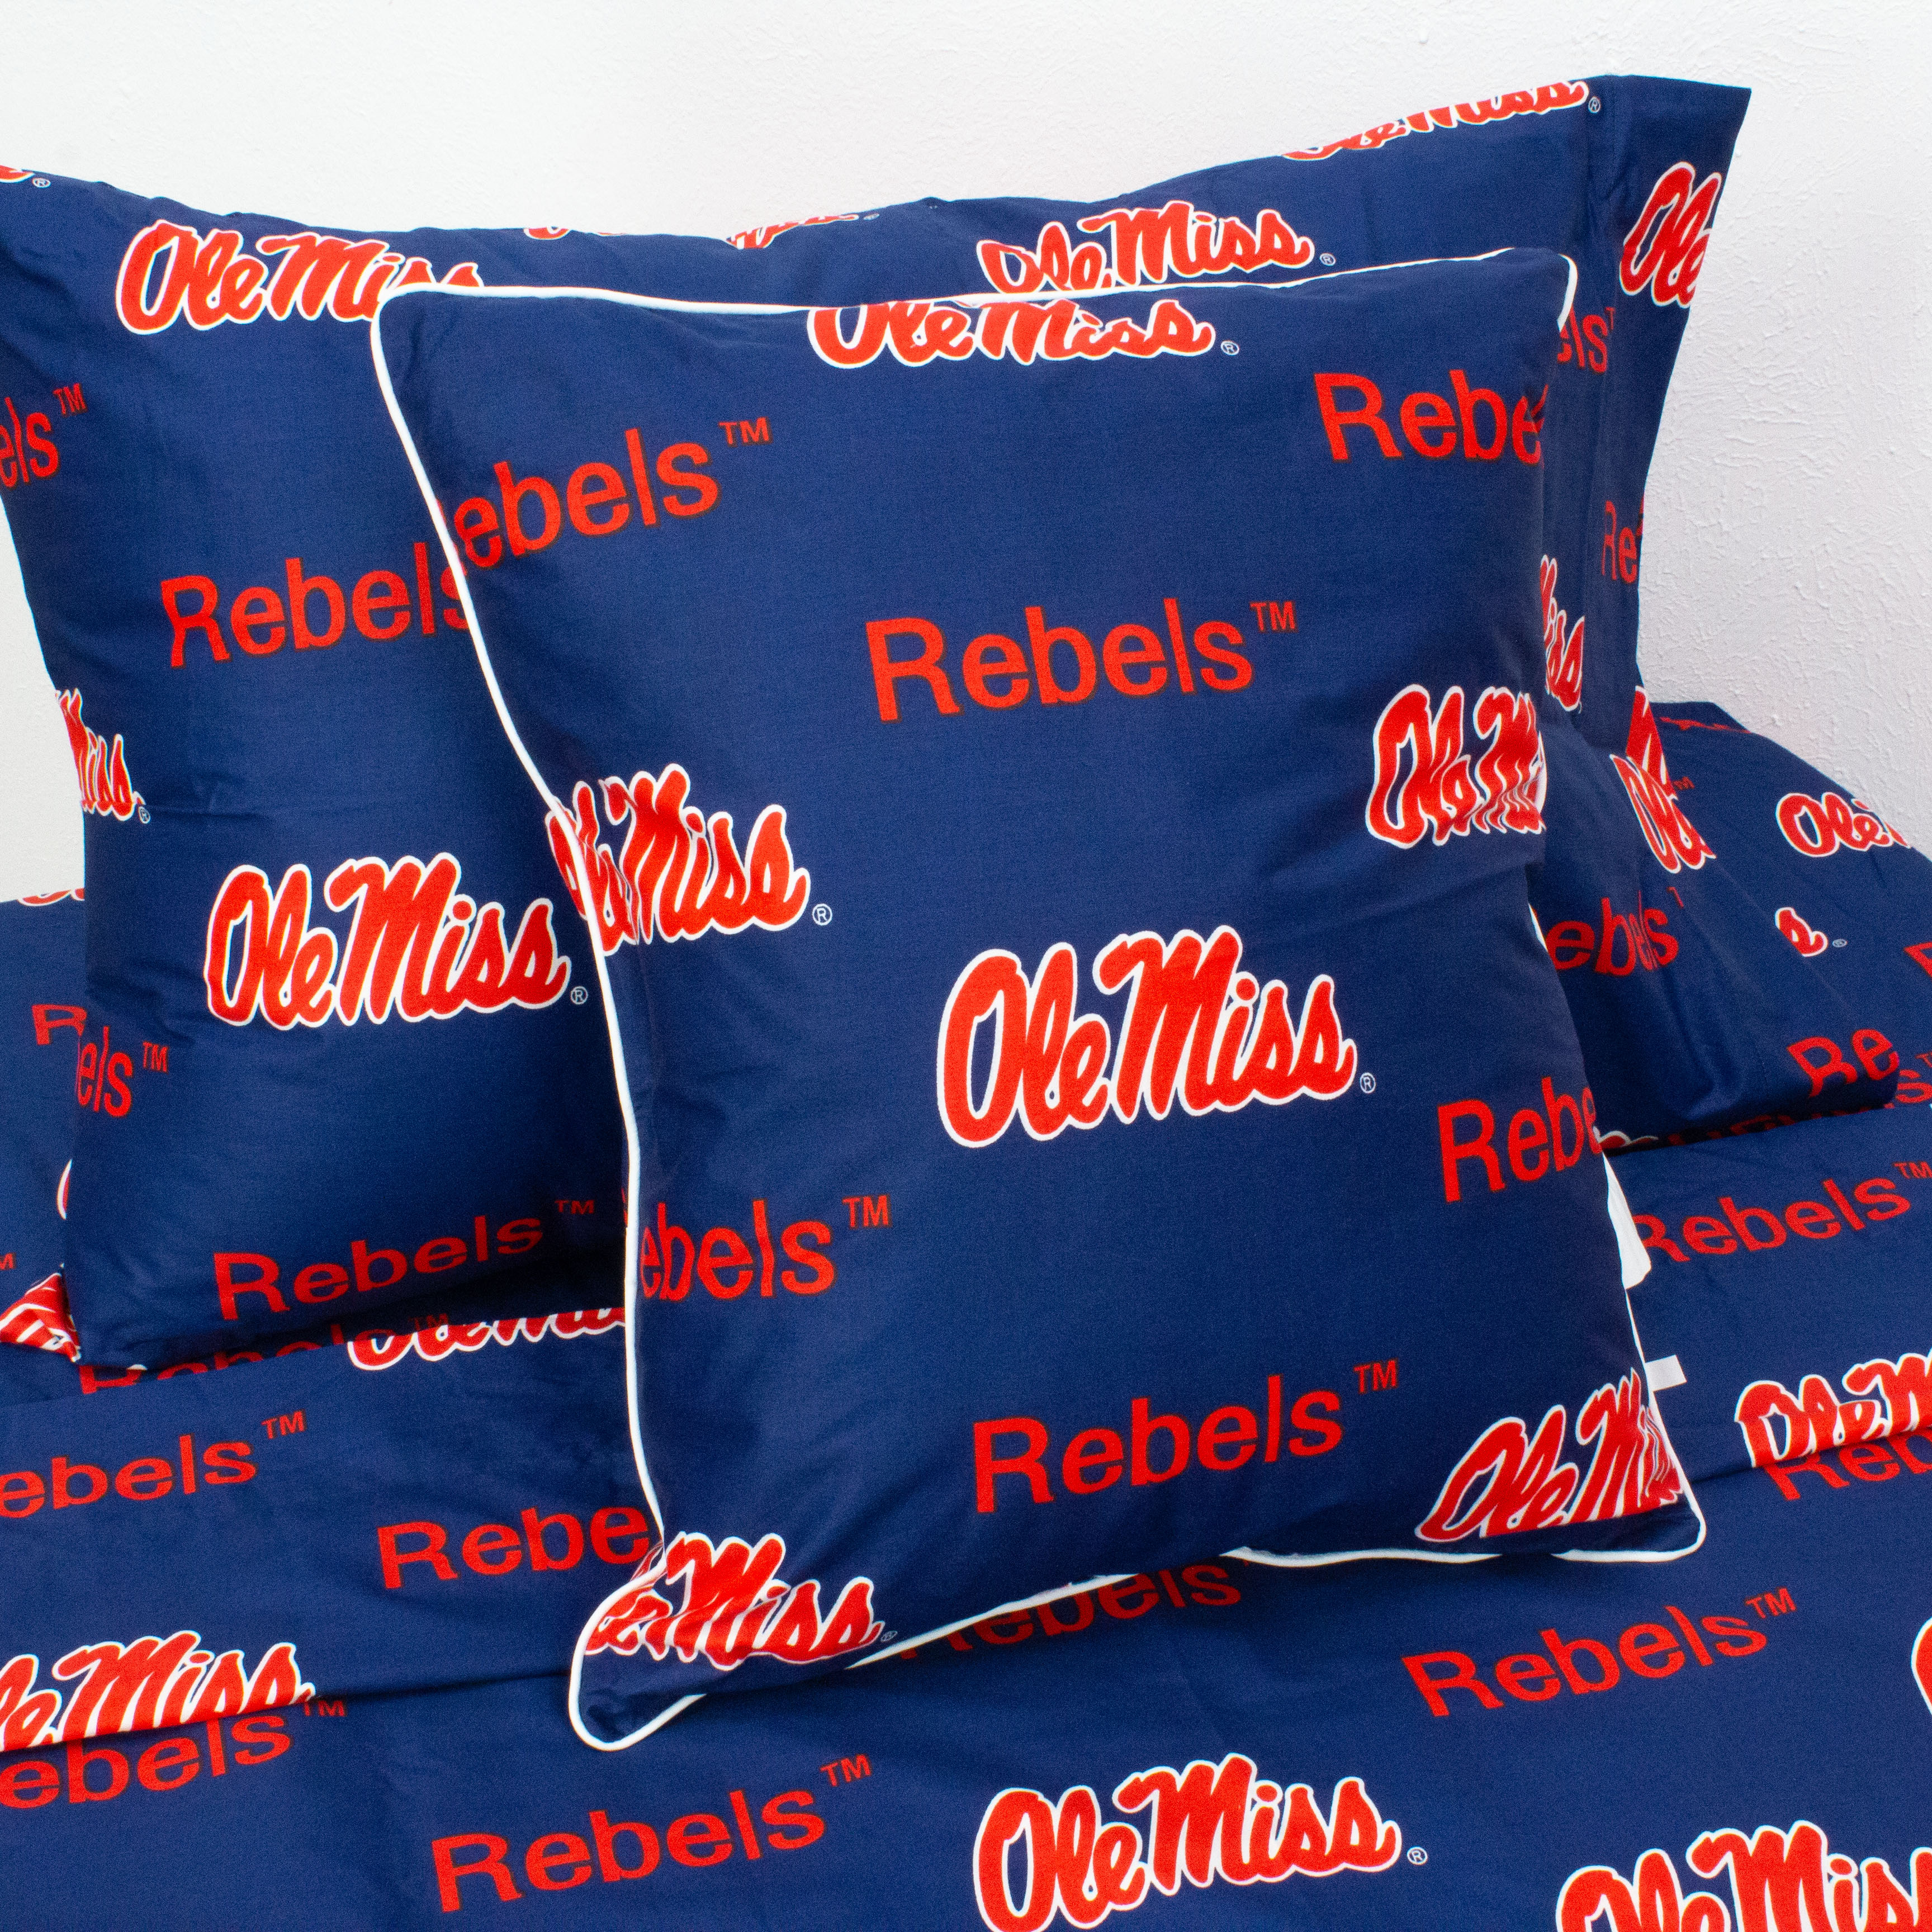 Mississippi Rebels 16" x 16" Decorative Pillow - (Includes 2 Decorative Pillows) - image 5 of 8